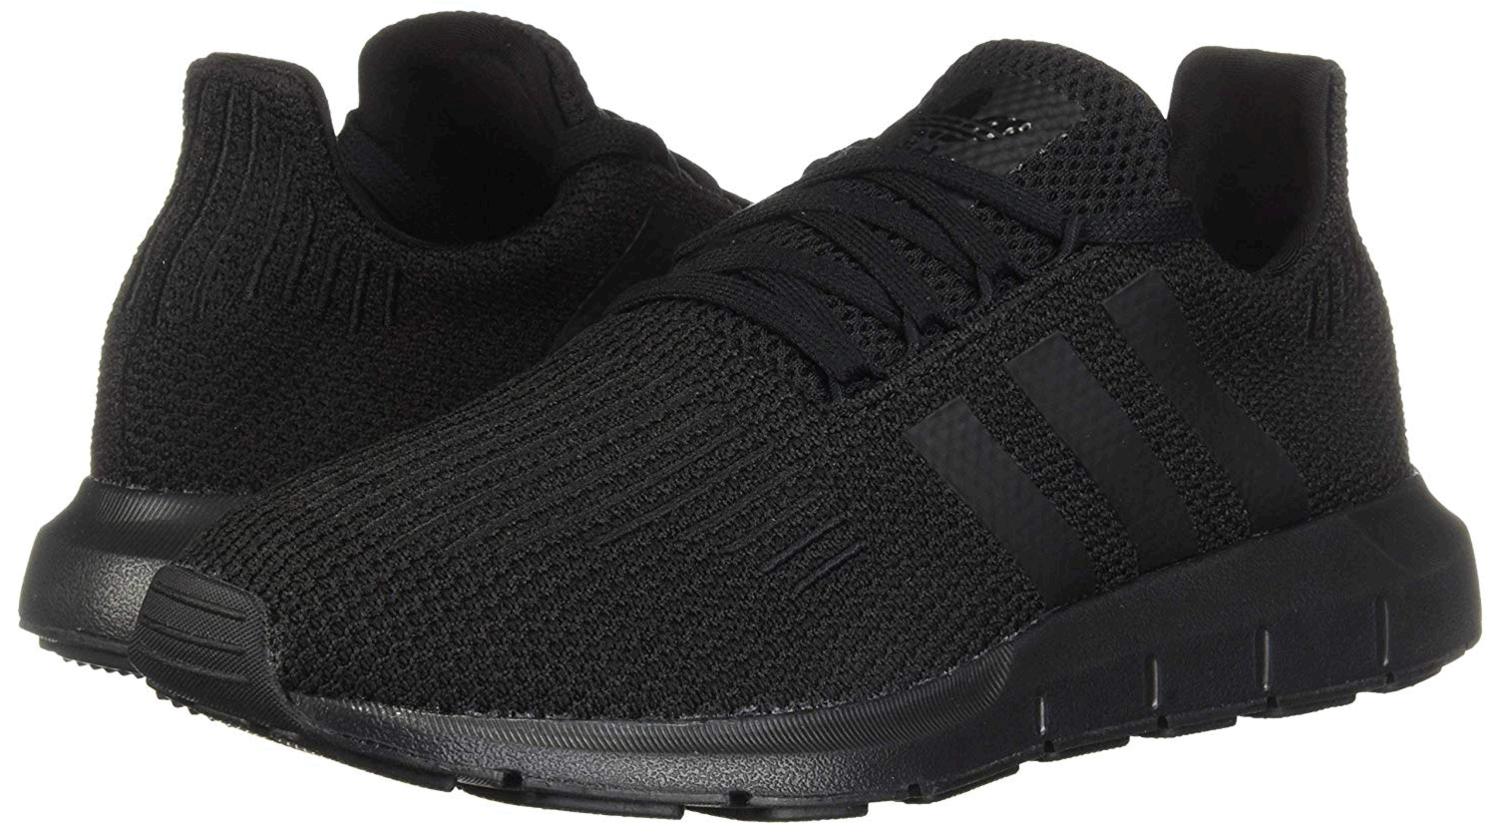 Adidas Men's Shoes Swift Fabric Low Top Lace Up Running, Black/Black